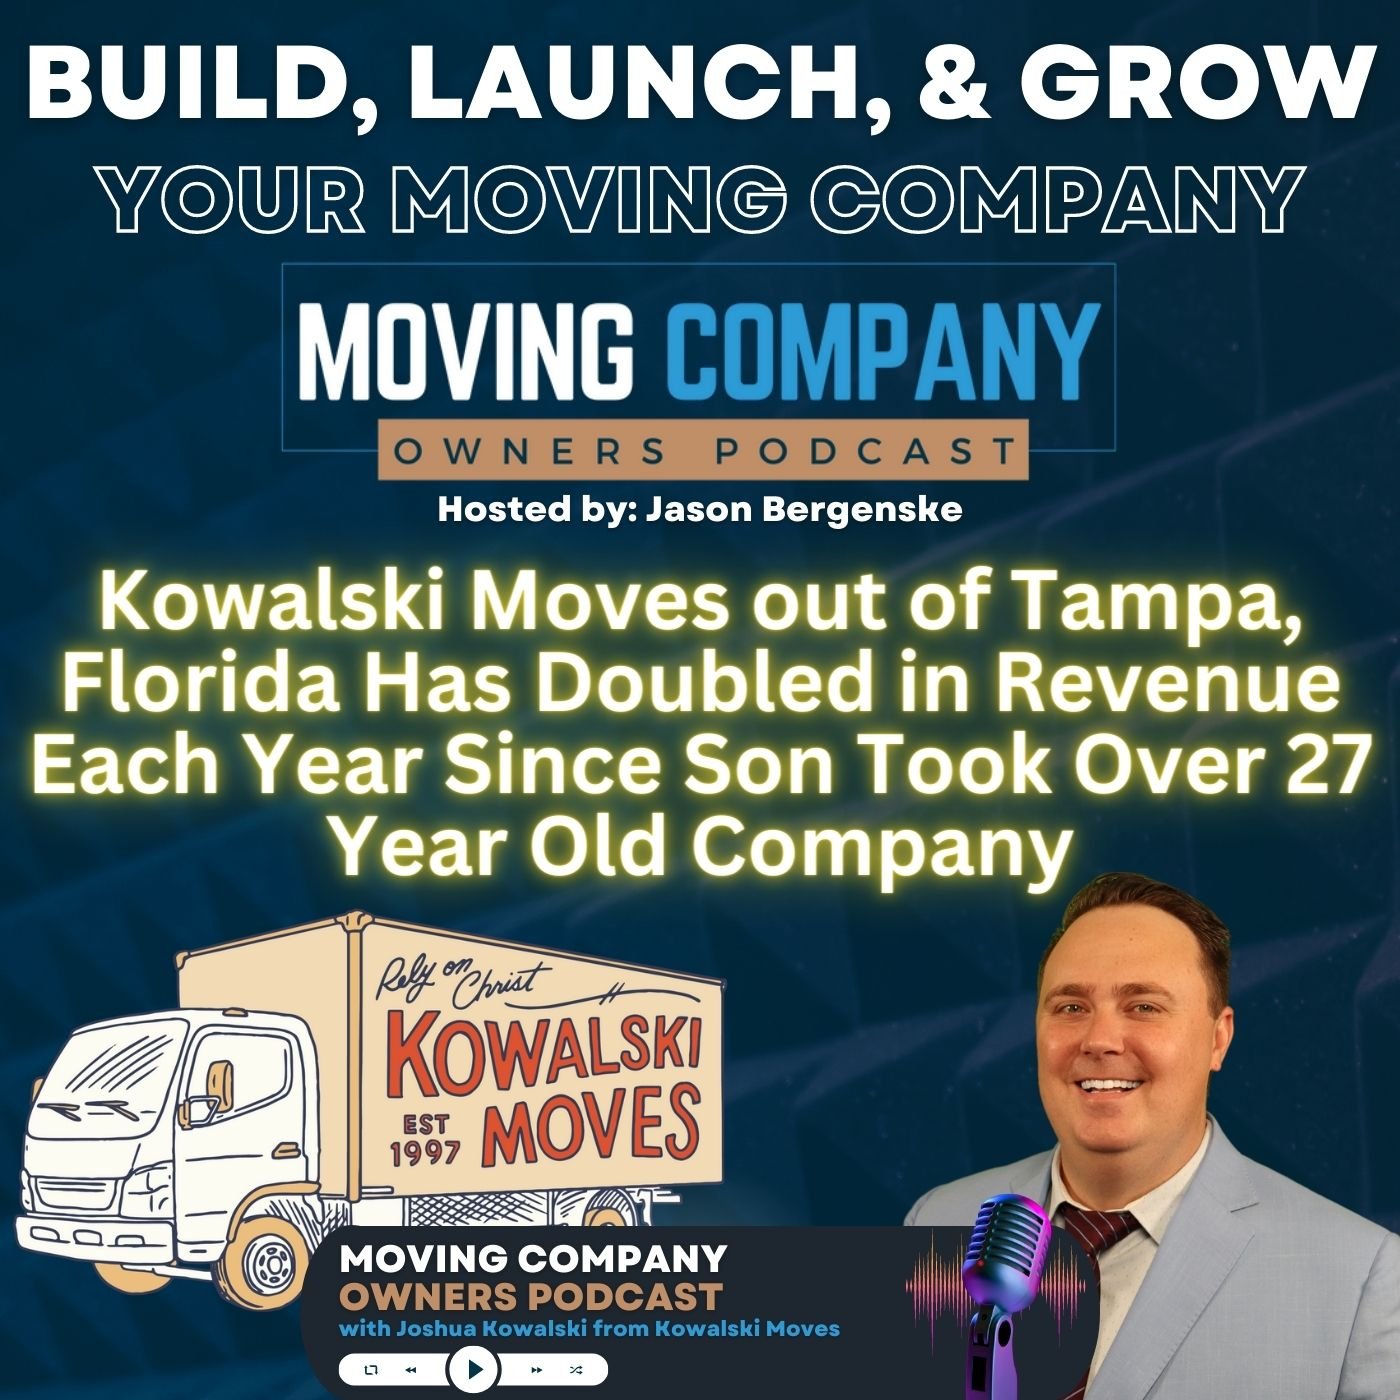 Kowalski Moves out of Tampa, Florida Has Doubled in Revenue Each Year Since Son Took Over 27 Year Old Company